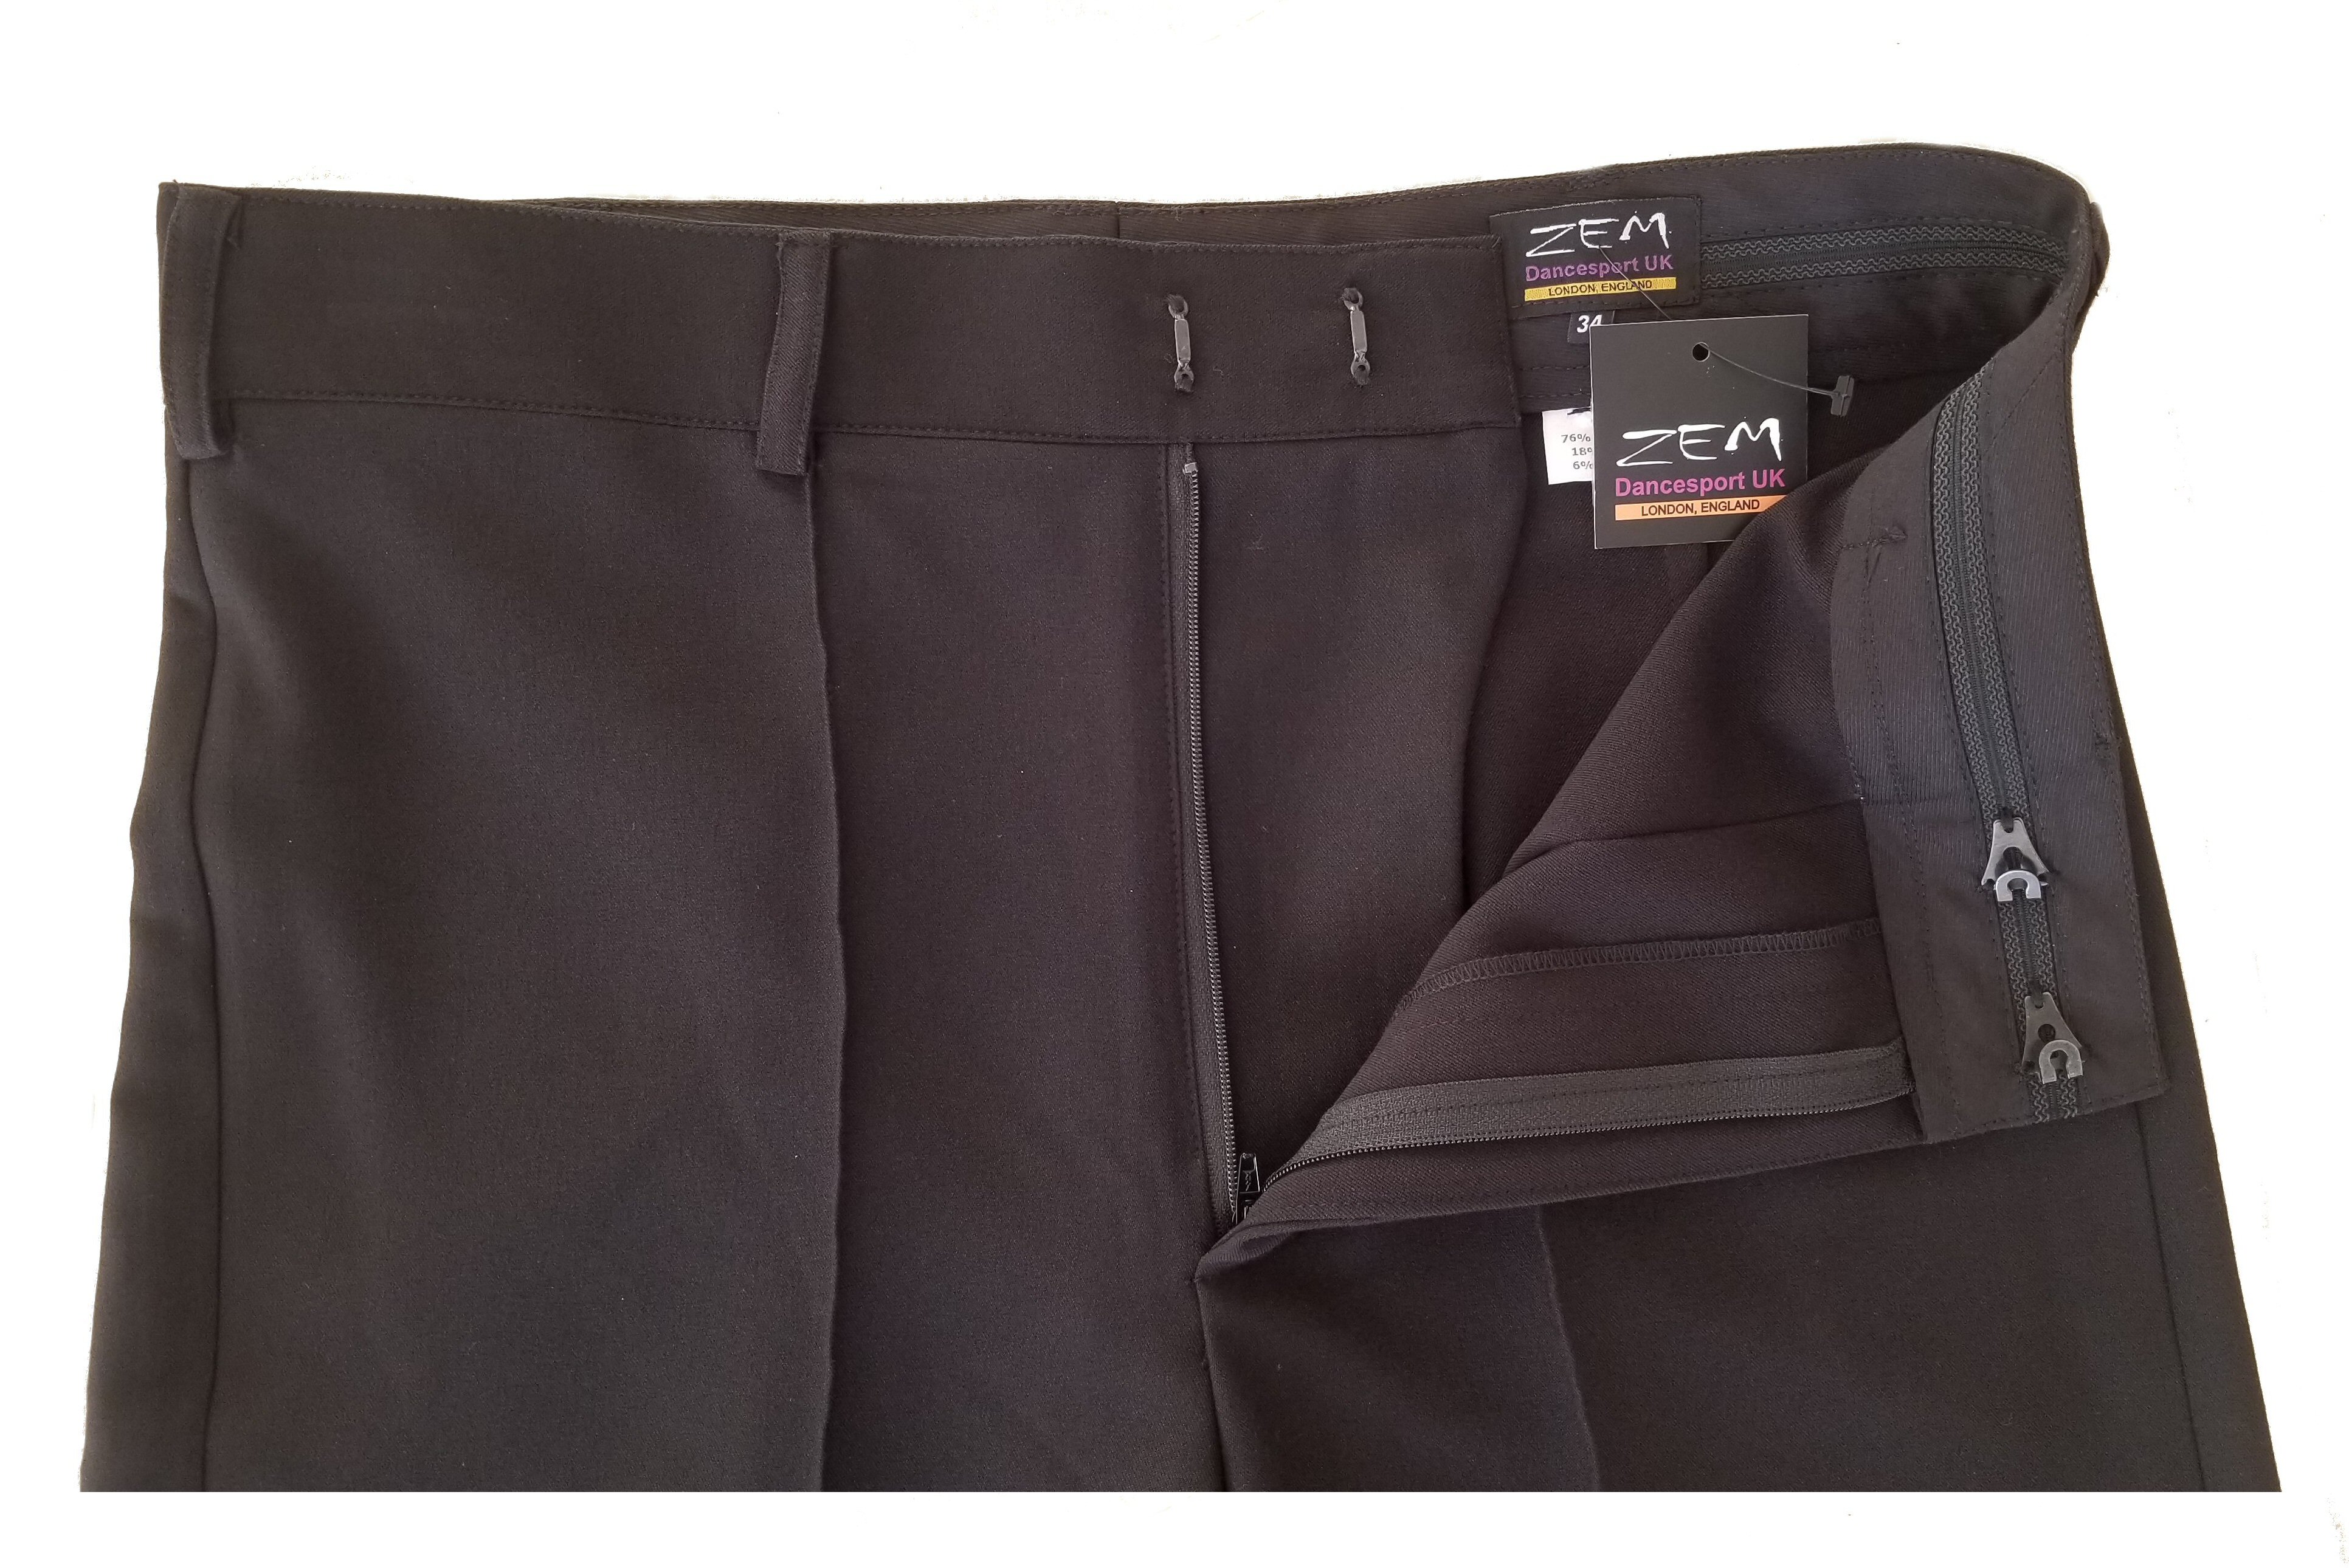 RS Atelier Argentine Tango trousers for Men